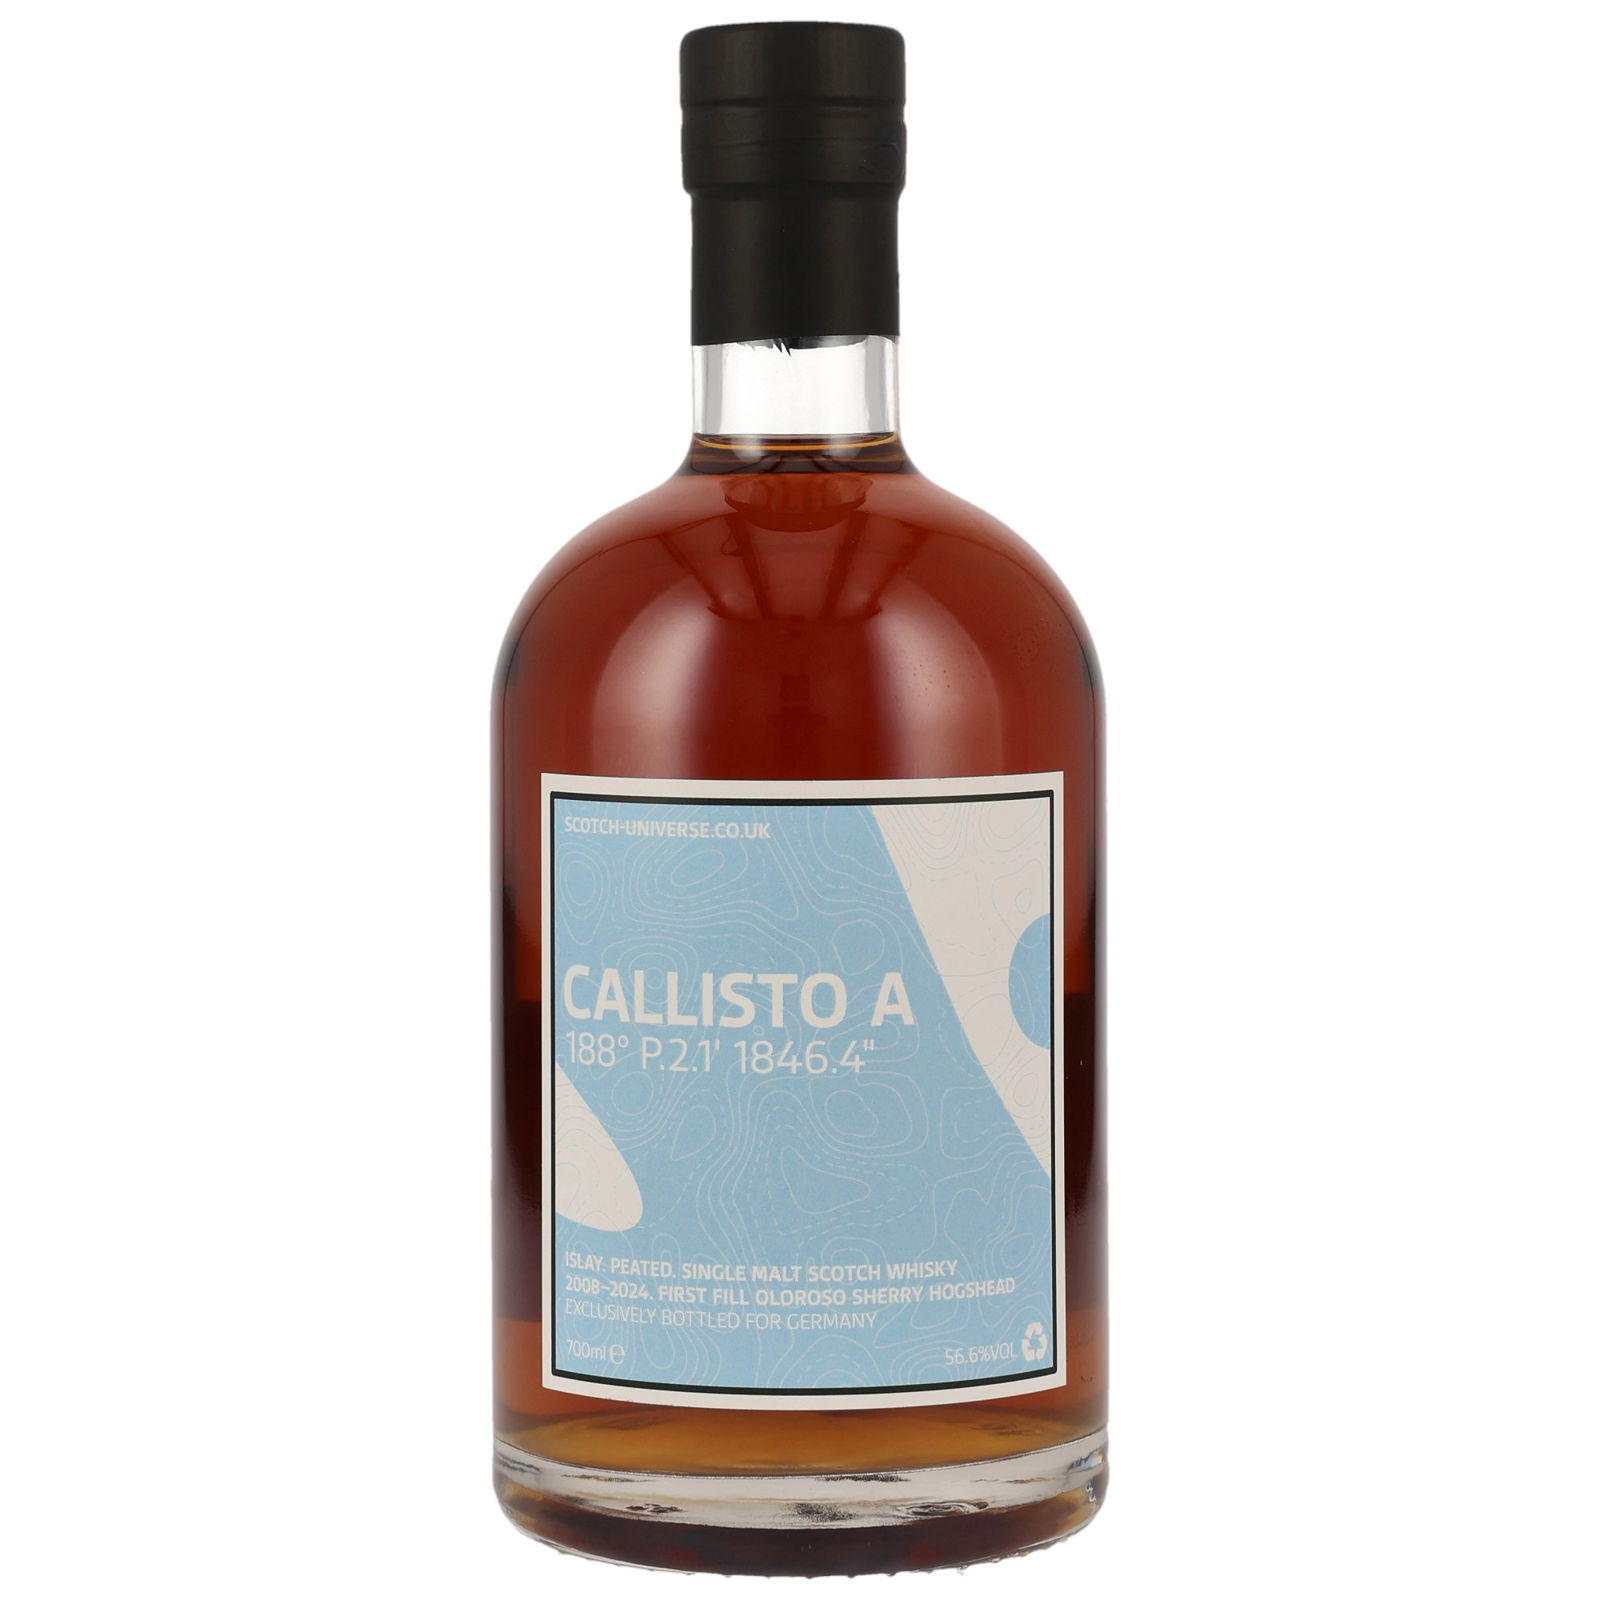 CALLISTO A 2008/2024 - 15 Jahre First Fill Oloroso Sherry Hogshead Germany exclusive (Scotch Universe)